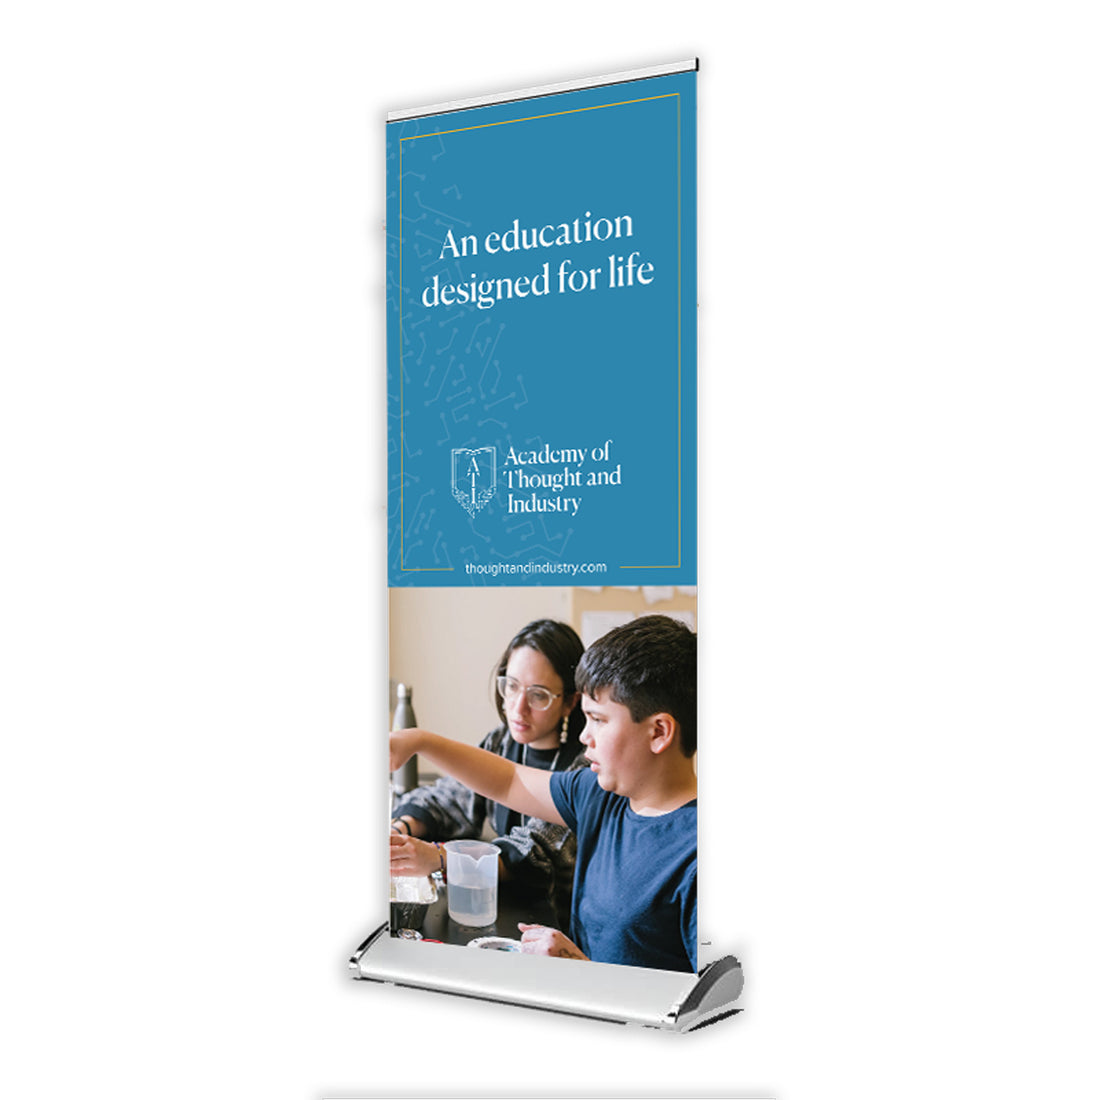 ATI Banner Stand - An education w/ pic